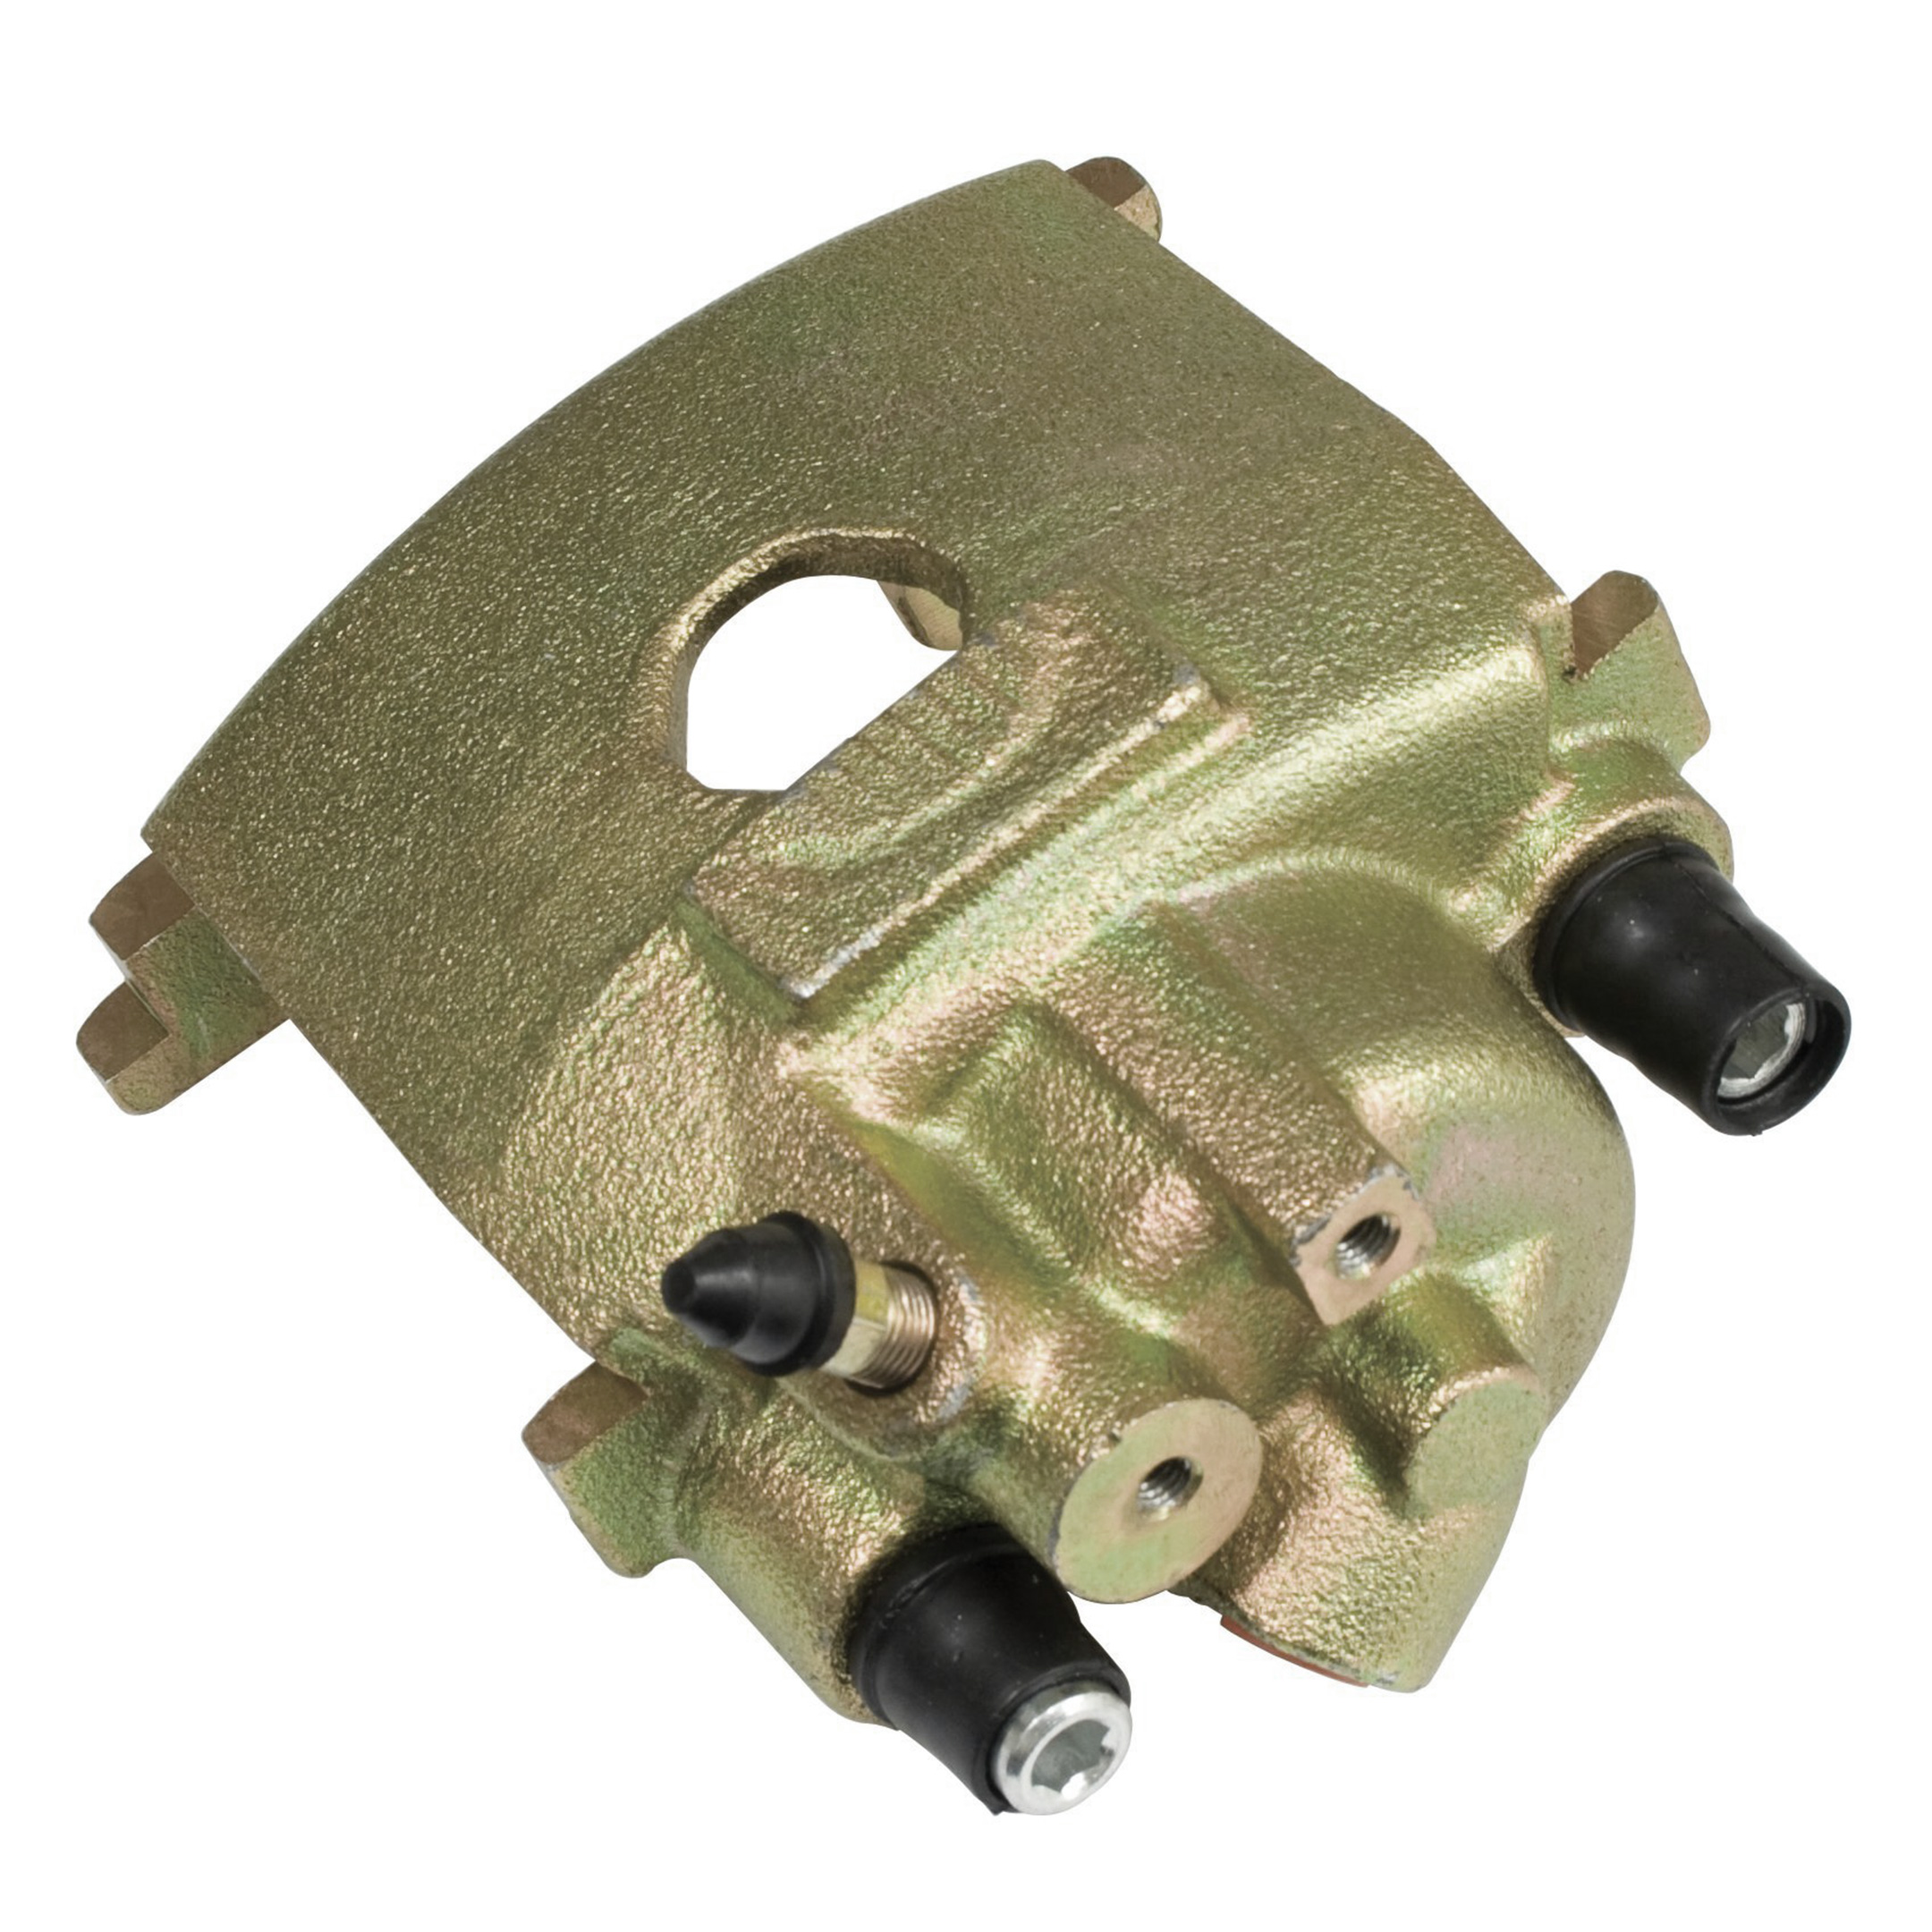 Replacement VW Caliper for EMPI Disc Brake Kit - Right Side